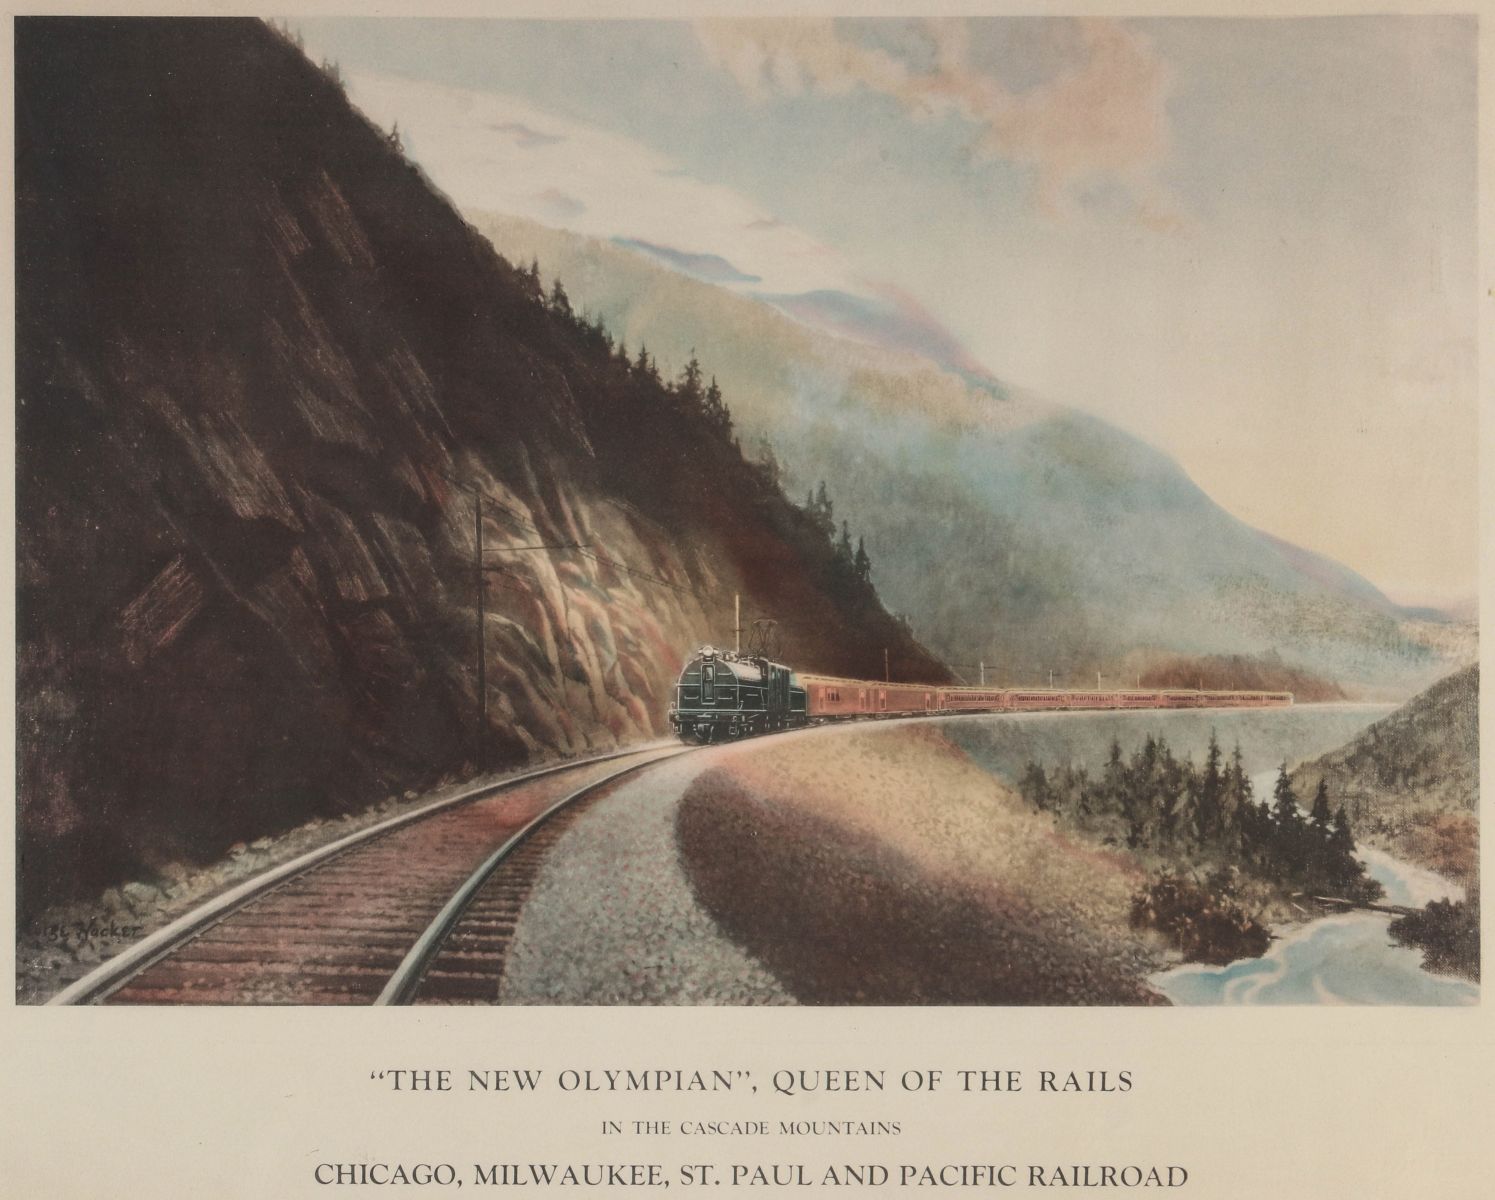 C.M.ST.P.&P. RR 'NEW OLYMPIAN QUEEN OF THE RAILS' PRINT